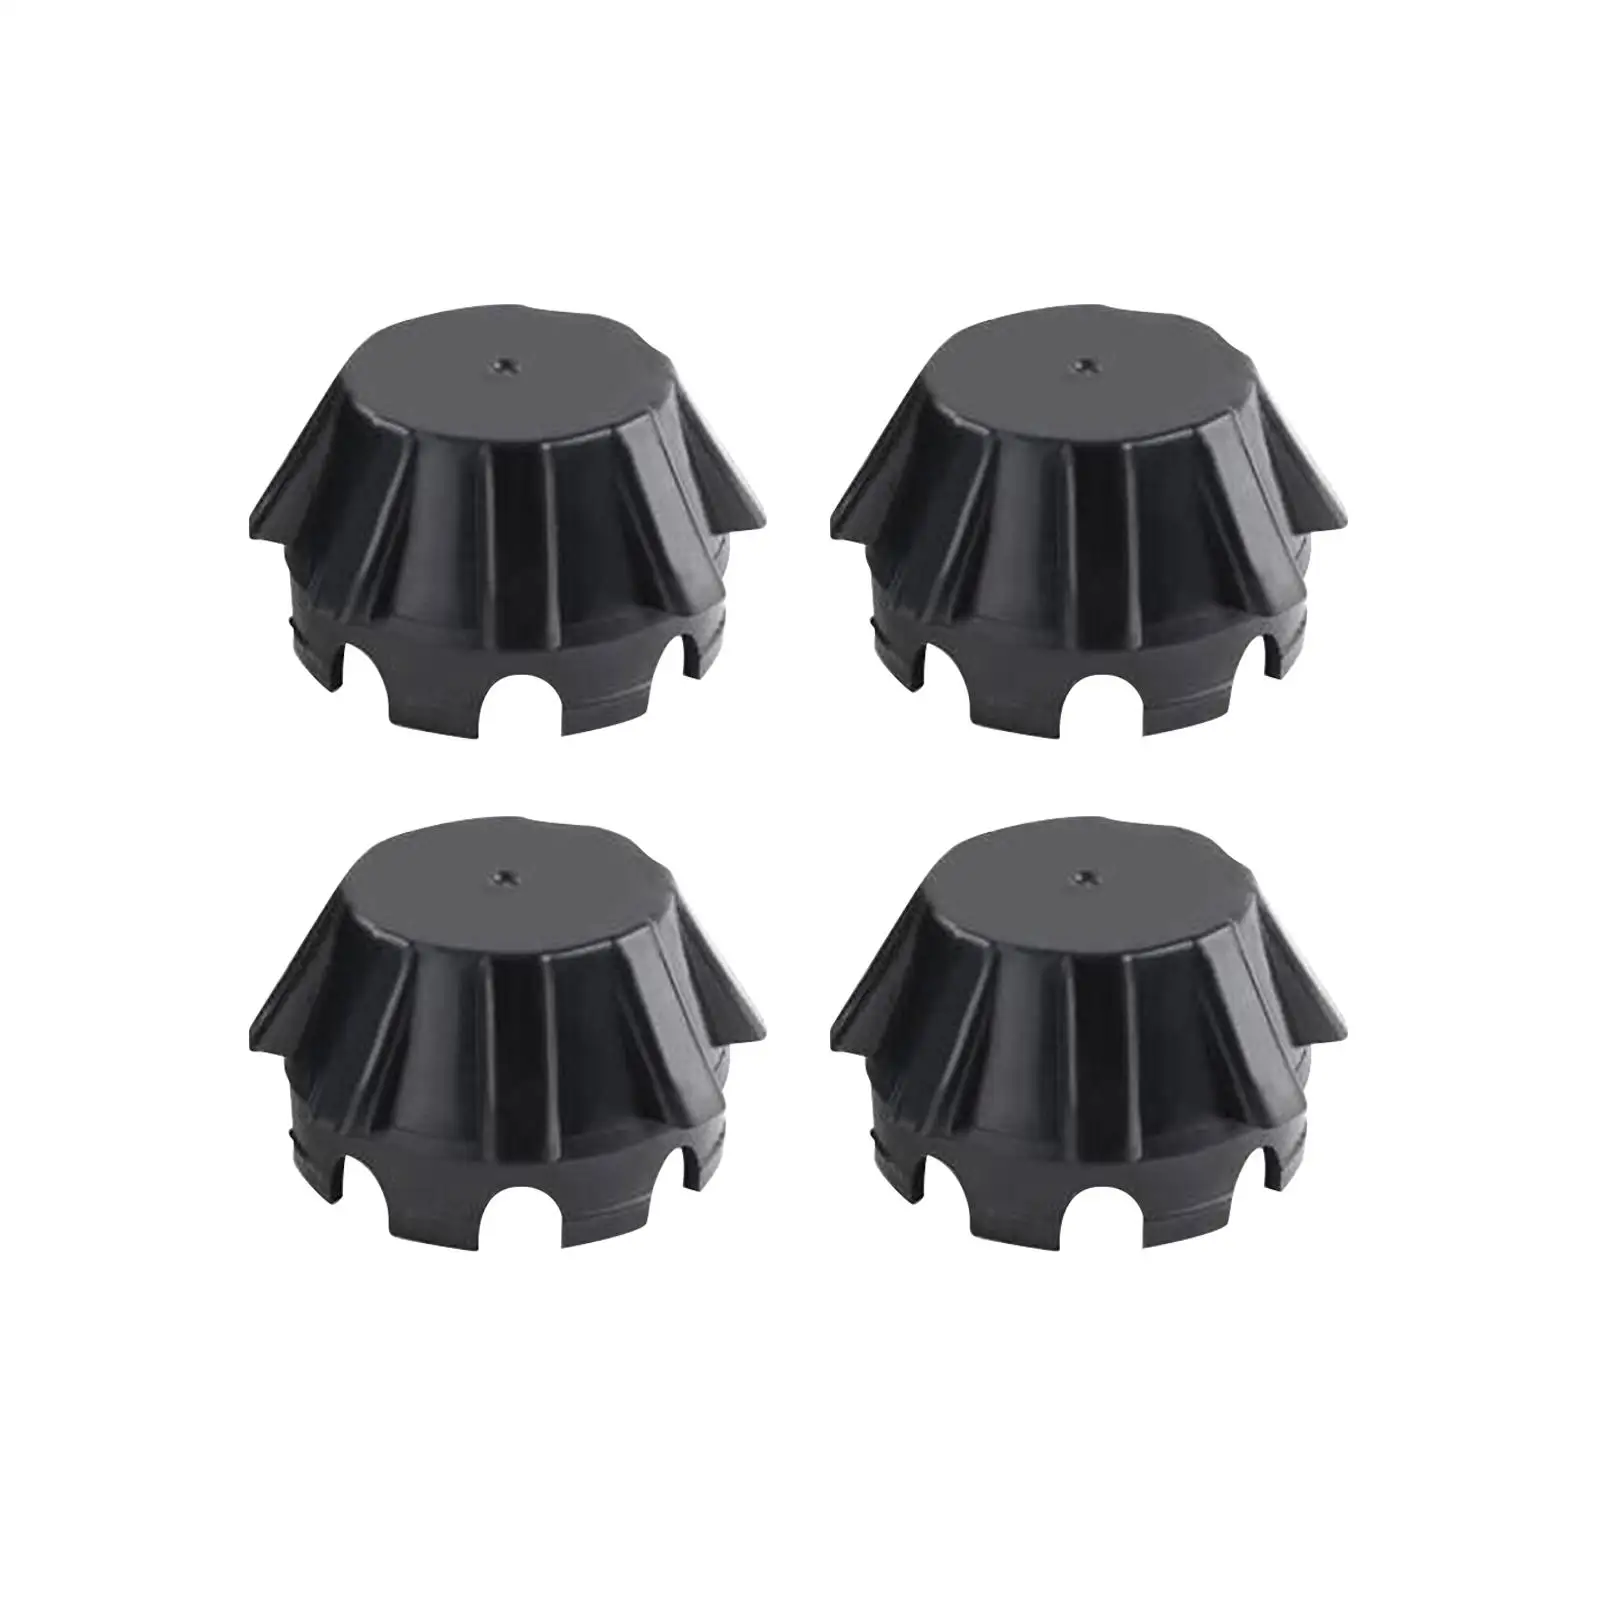 4x Tire Wheel Hub Caps 11065-1341 Easy Installation Replacement Assembly Accessory for Kawasaki Teryx Krx 1000 2020-2022